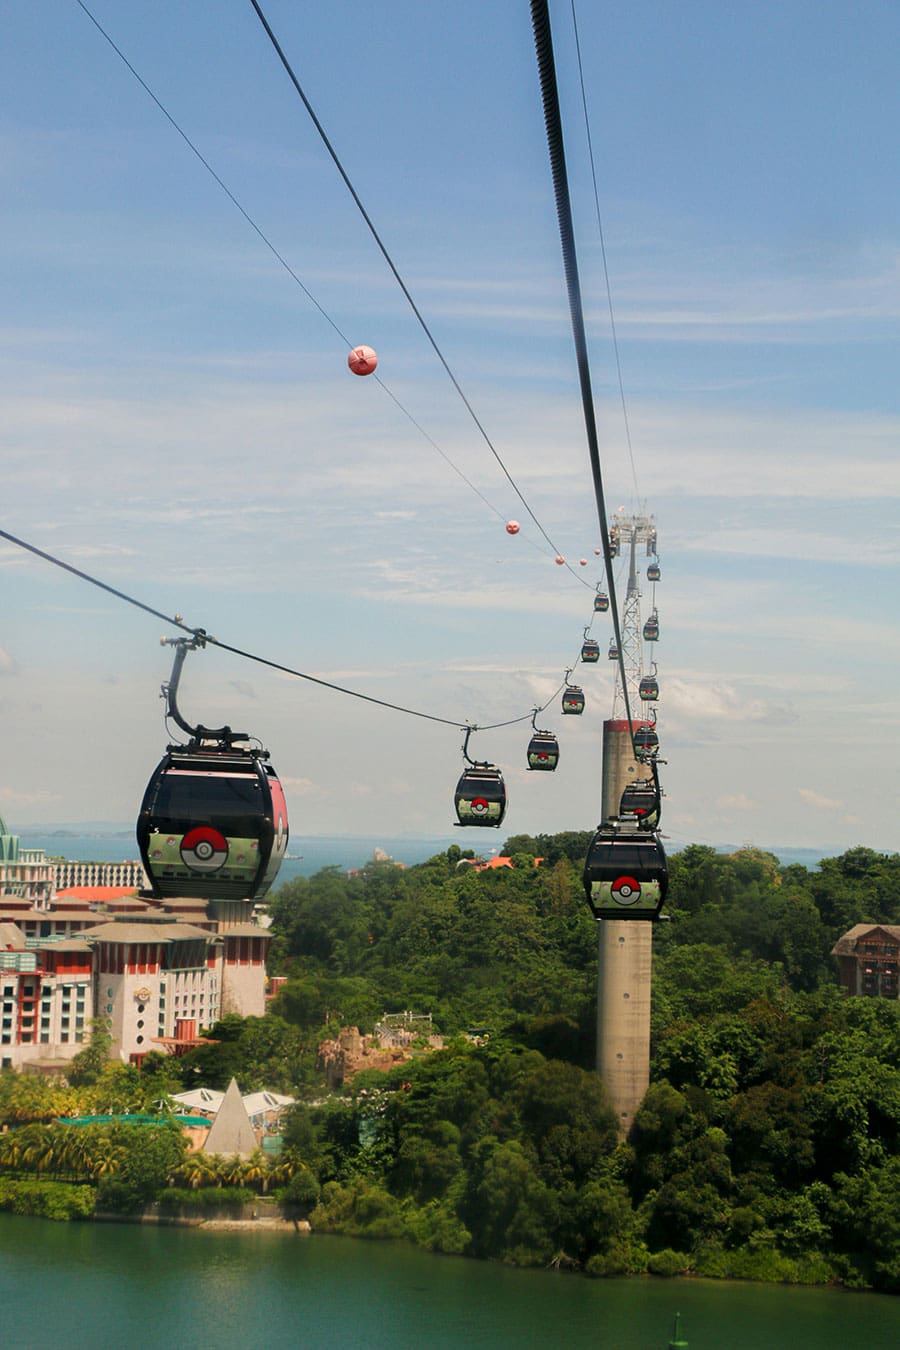 A series of cable cars travels over water, trees and buildings in Sentosa, an accessible travel destination in Singapore.